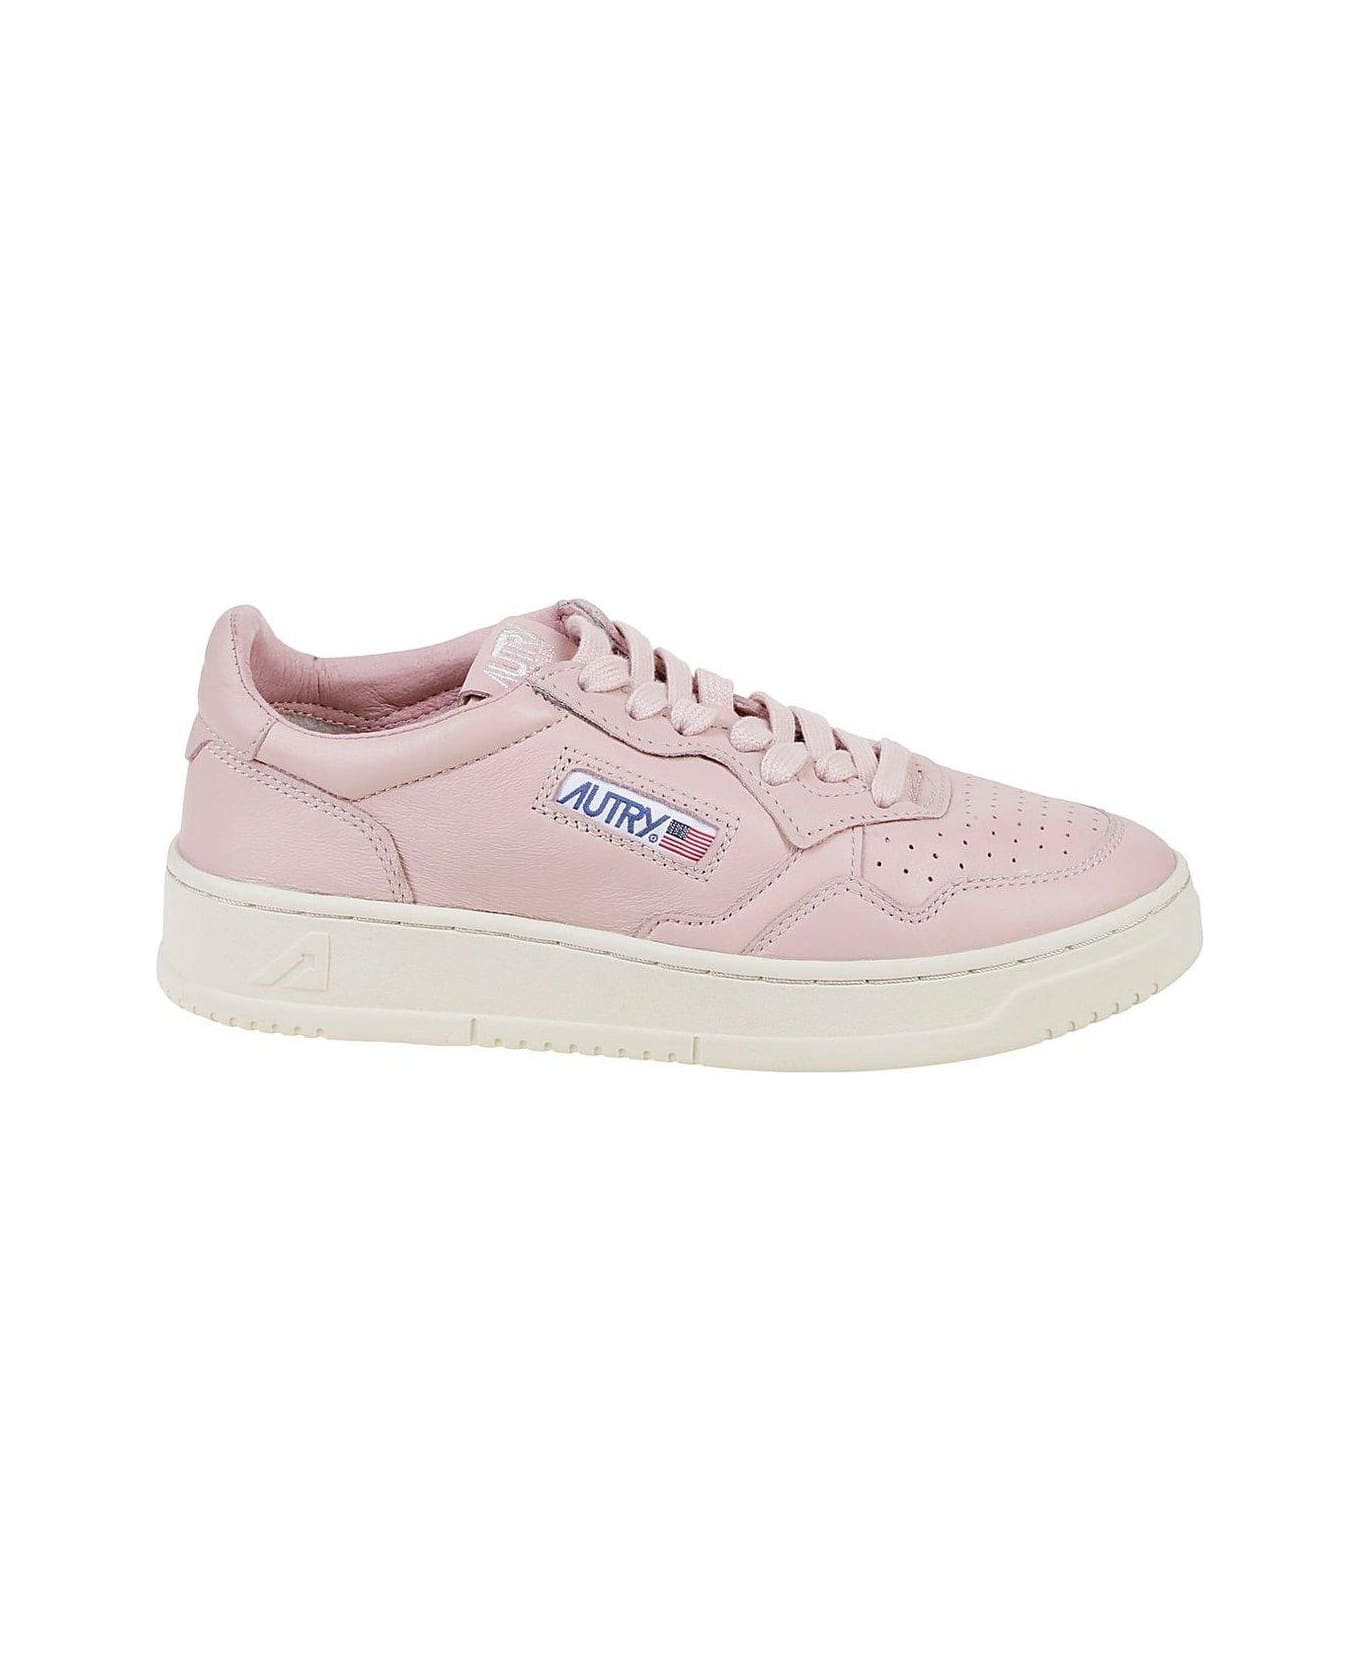 Autry Lace-up Sneakers - Rose スニーカー